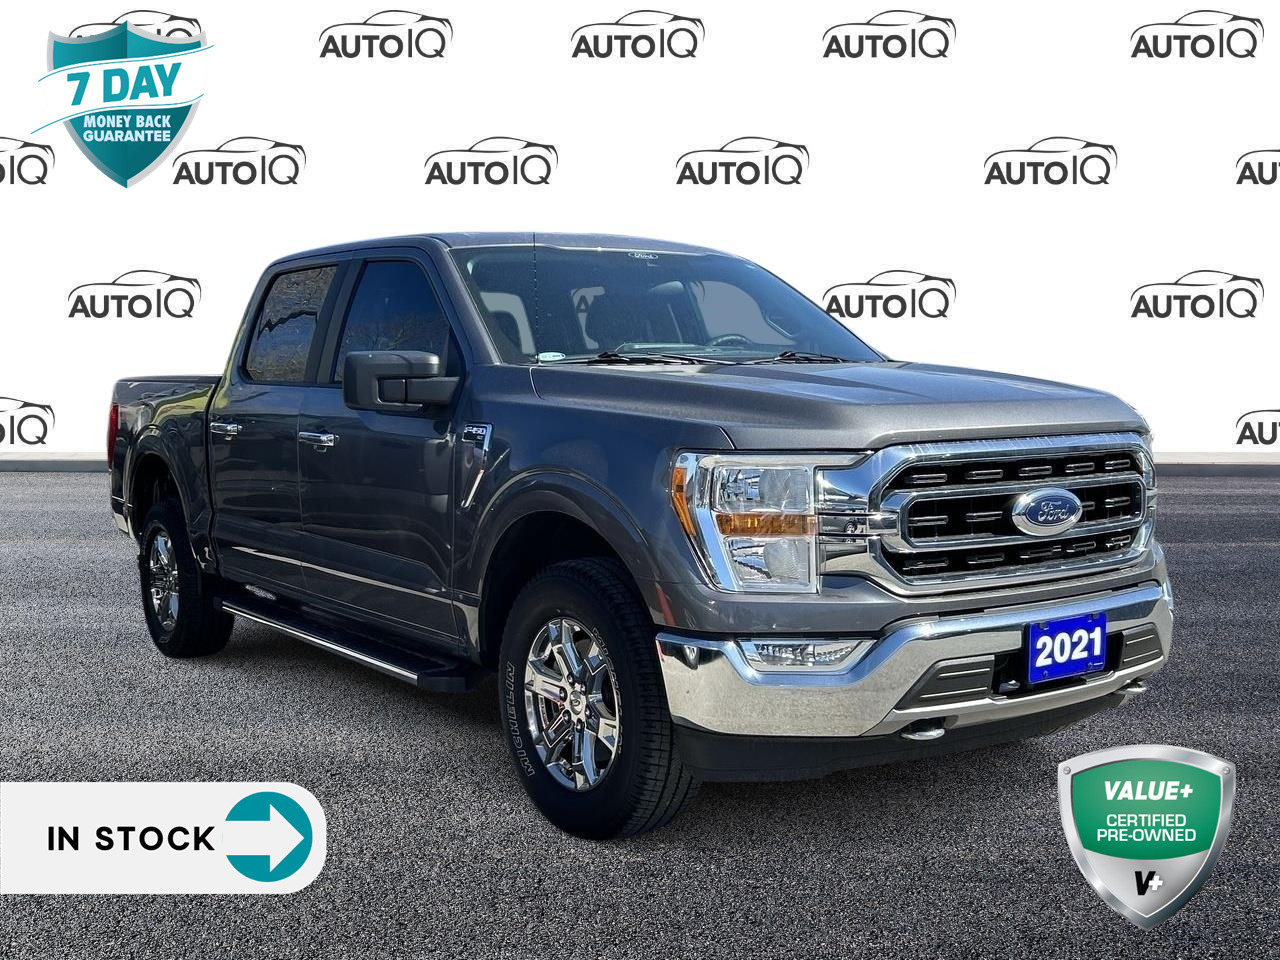 2021 Ford F-150 XLT 6470 LBS PAYLOAD PKG. | CHROME BUMPERS | AIR C